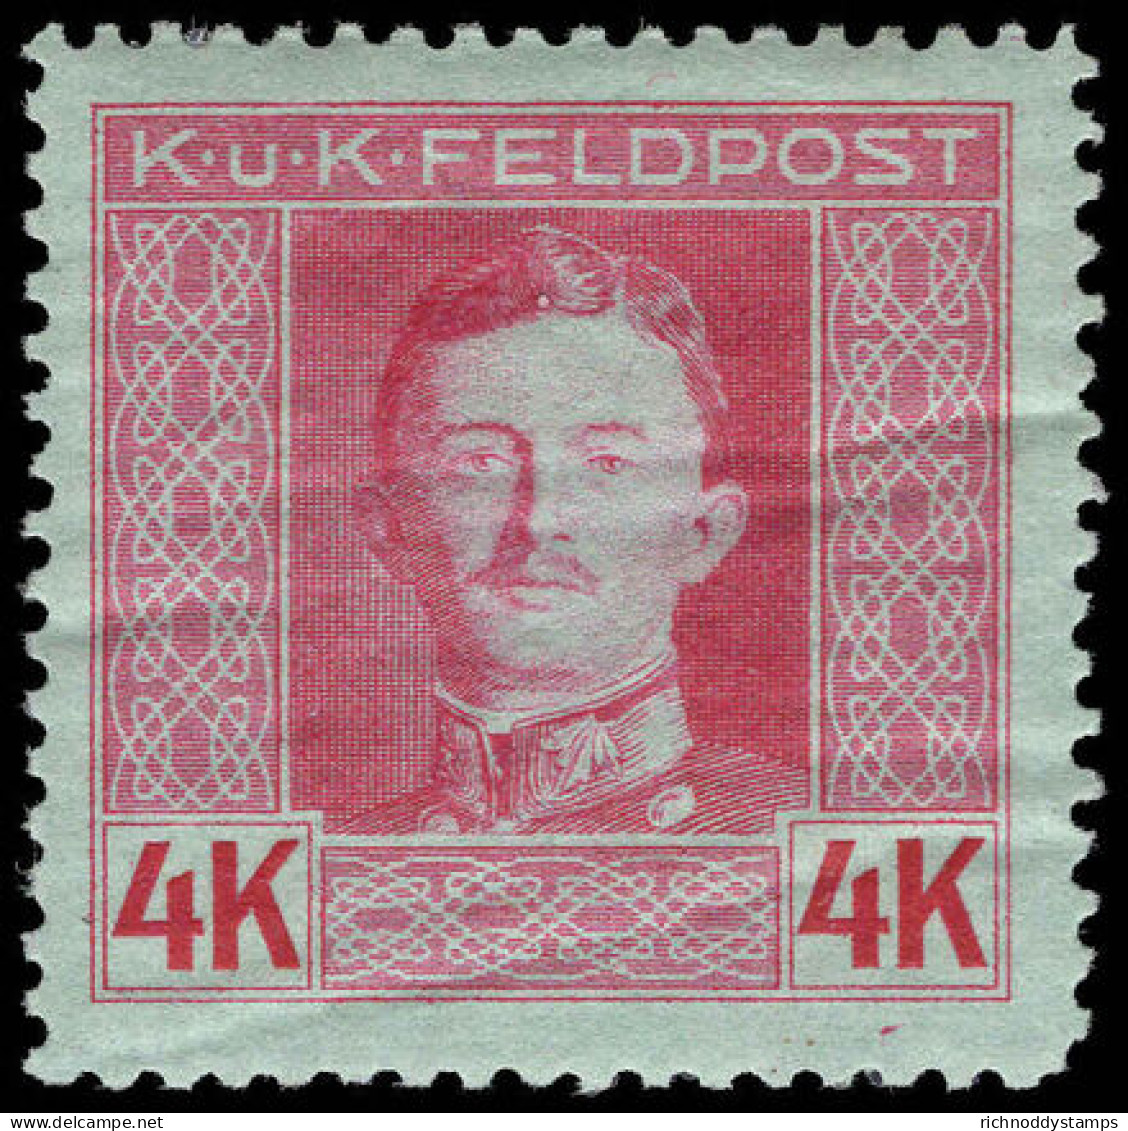 Austro-Hungarian Military Post KUK 1917-18 4k Carmine On Green Perf 12.5 Unmounted Mint.189; Lightly Mounted Mint. - Eastern Austria